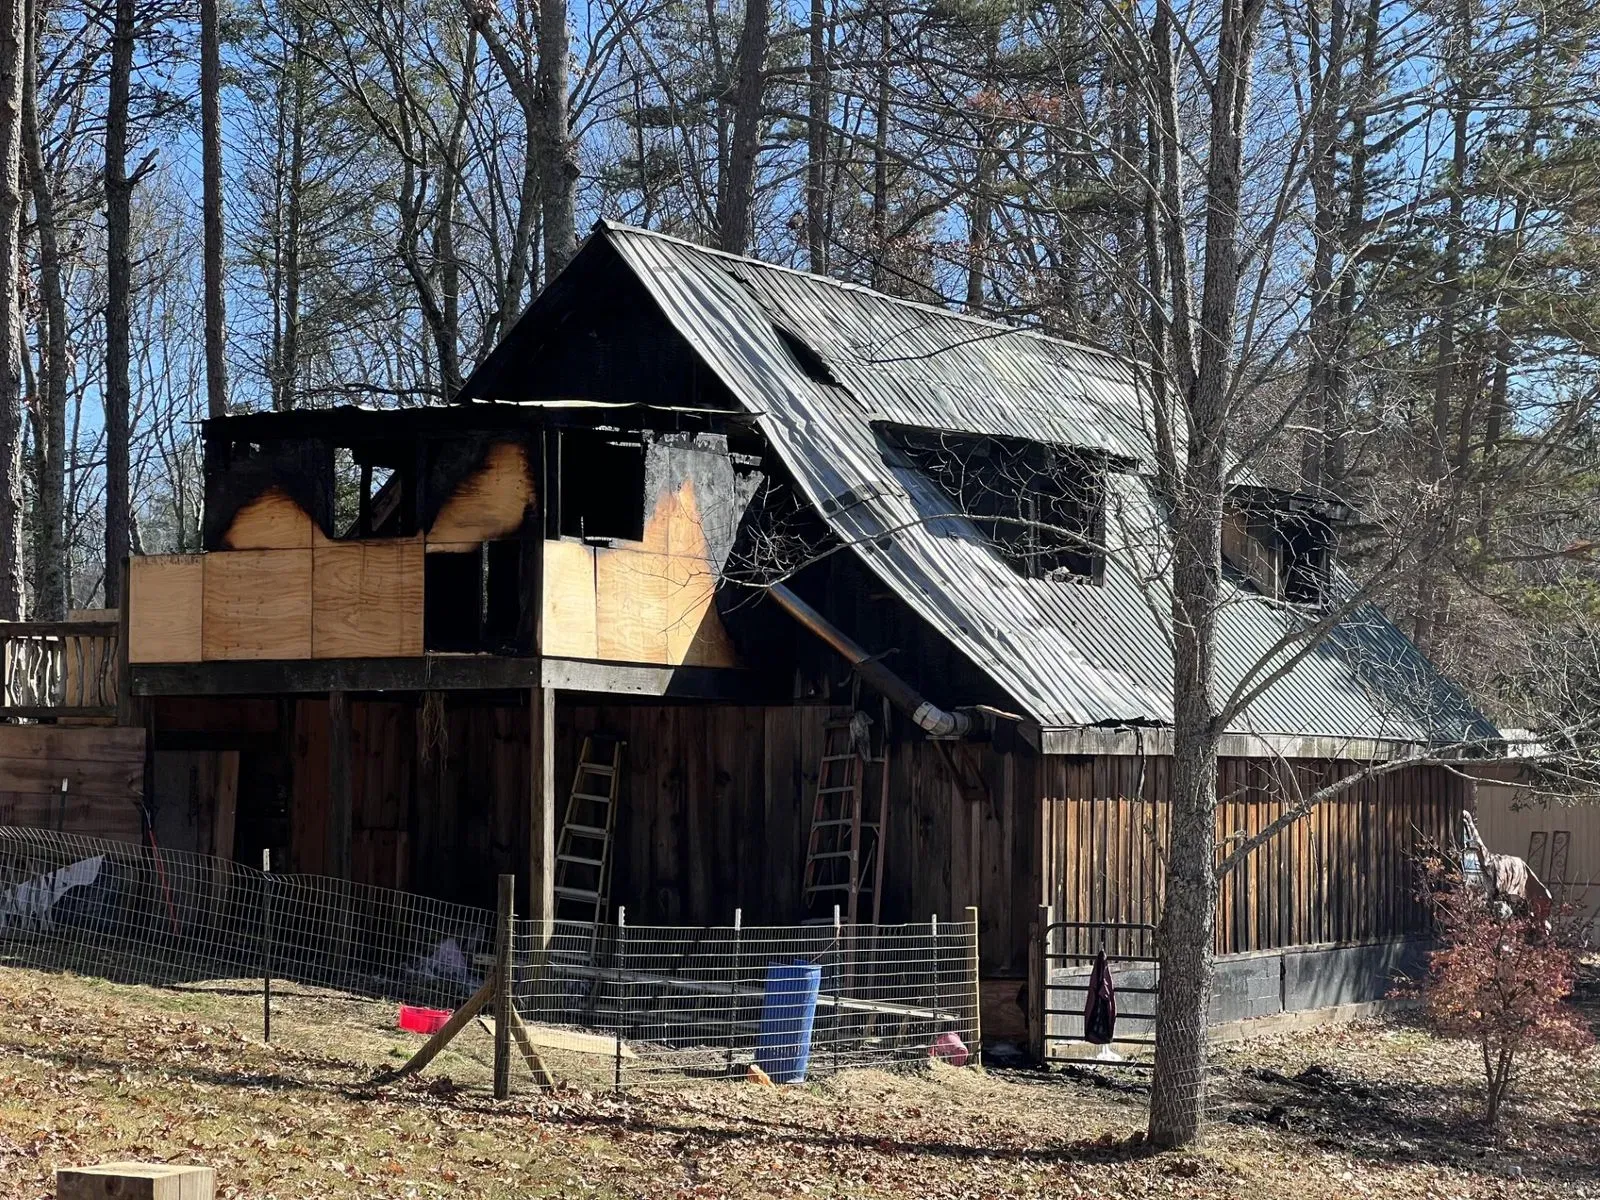 COMMUNITY RALLIES TO SUPPORT MILLS RIVER COUPLE WHO LOST HOME AND PET IN TRAGIC FIRE